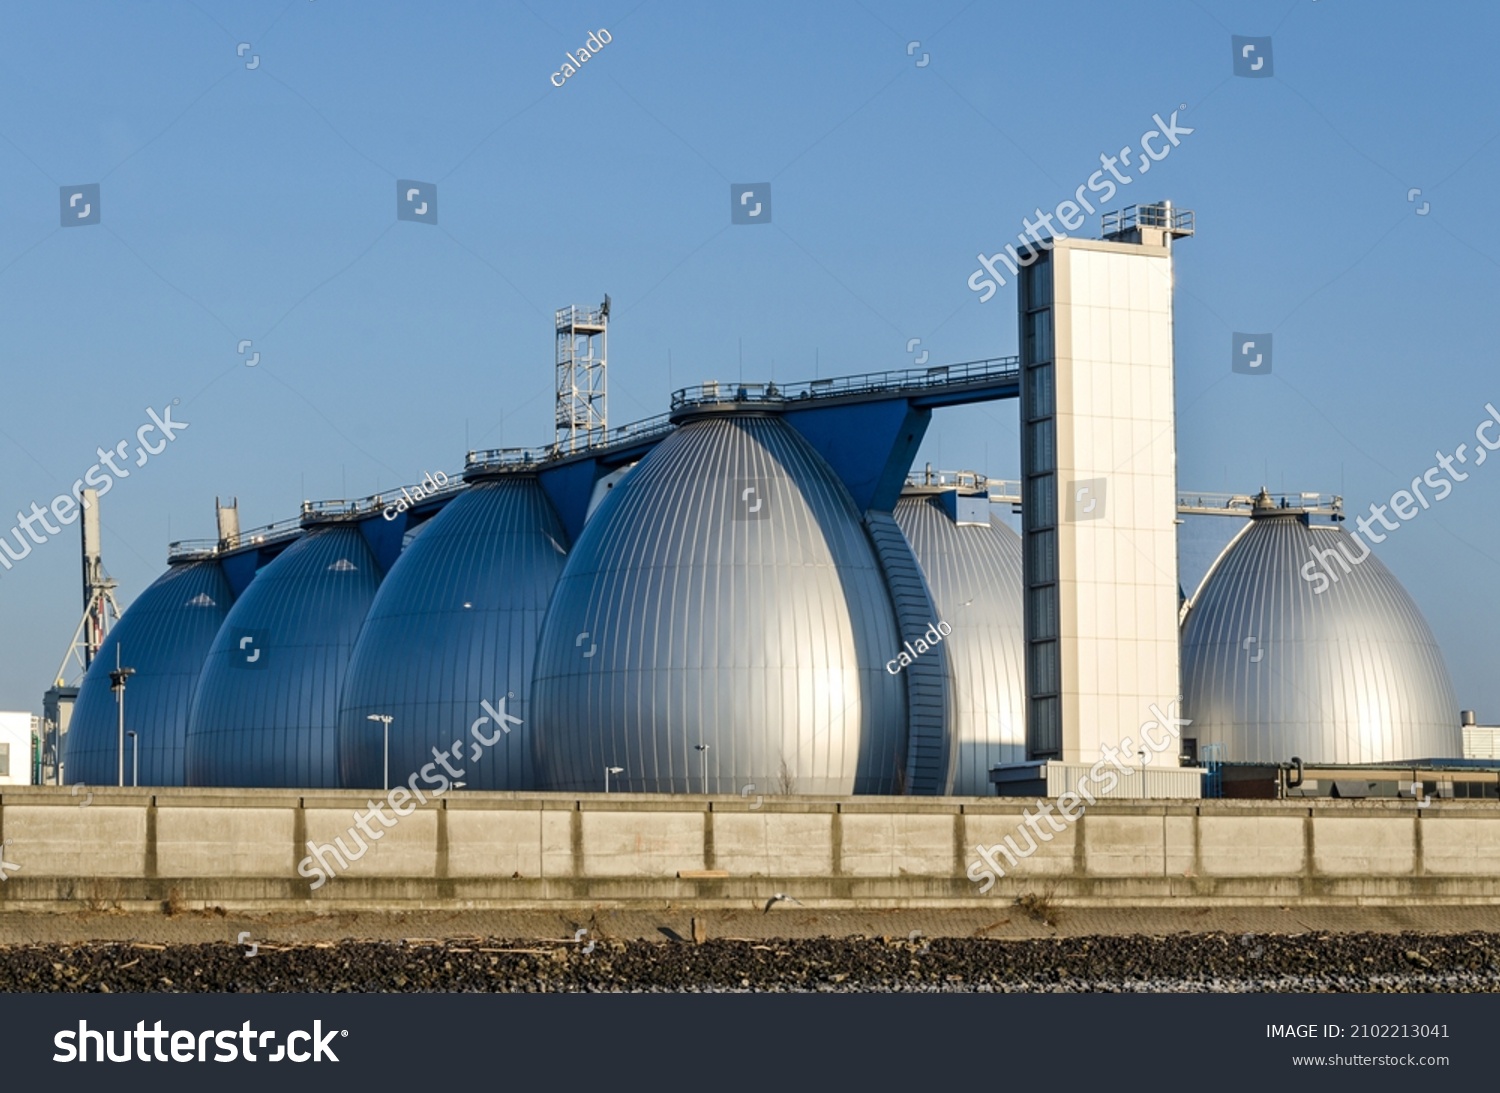 Gas storage tanks in the harbour area in Hamburg, Germany  #2102213041